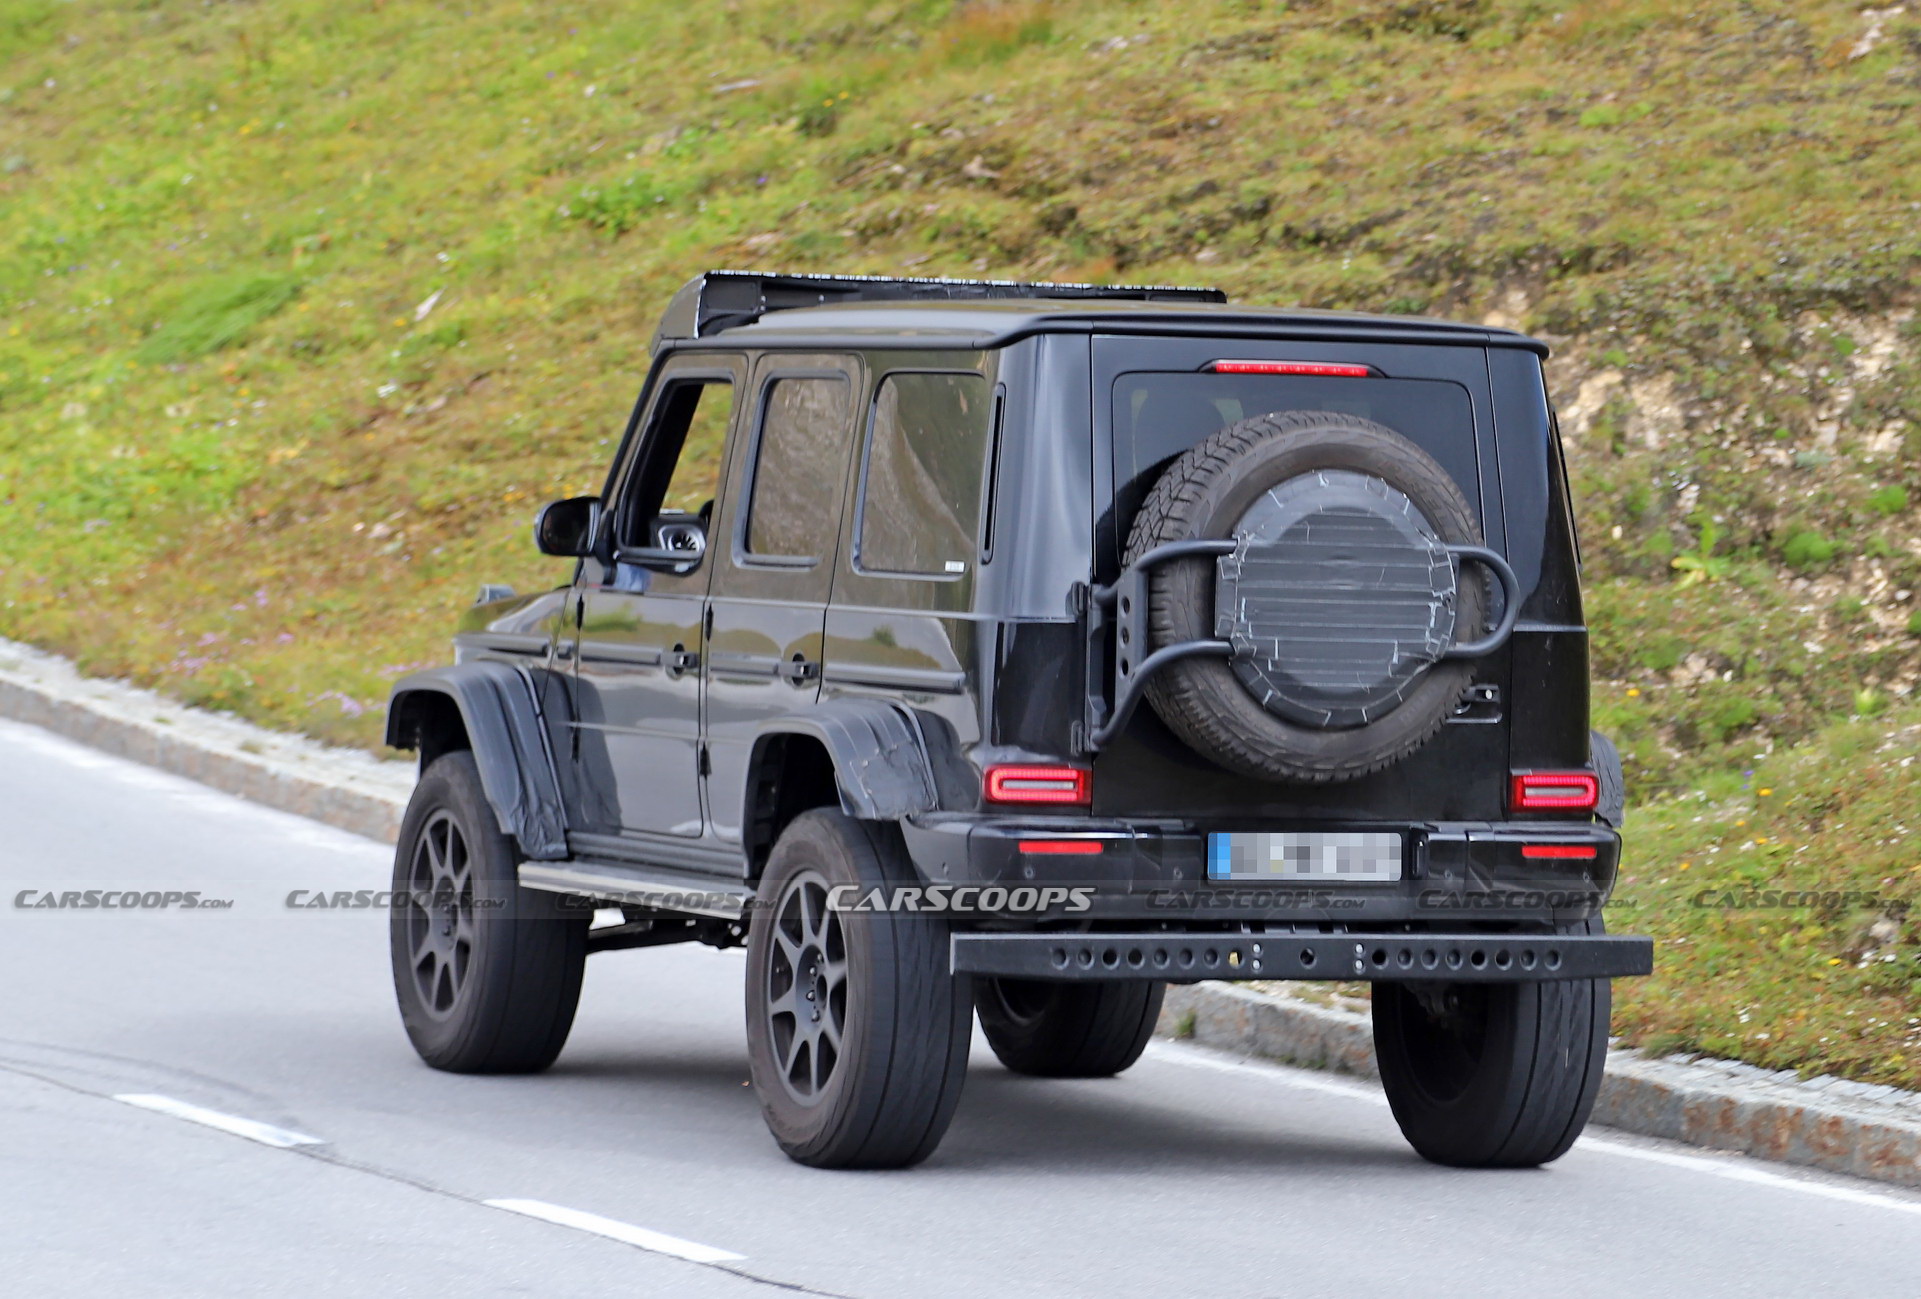 21 Mercedes Amg G Class 4x4 Spied Undisguised Looks Every Bit As Wild As The Original Carscoops